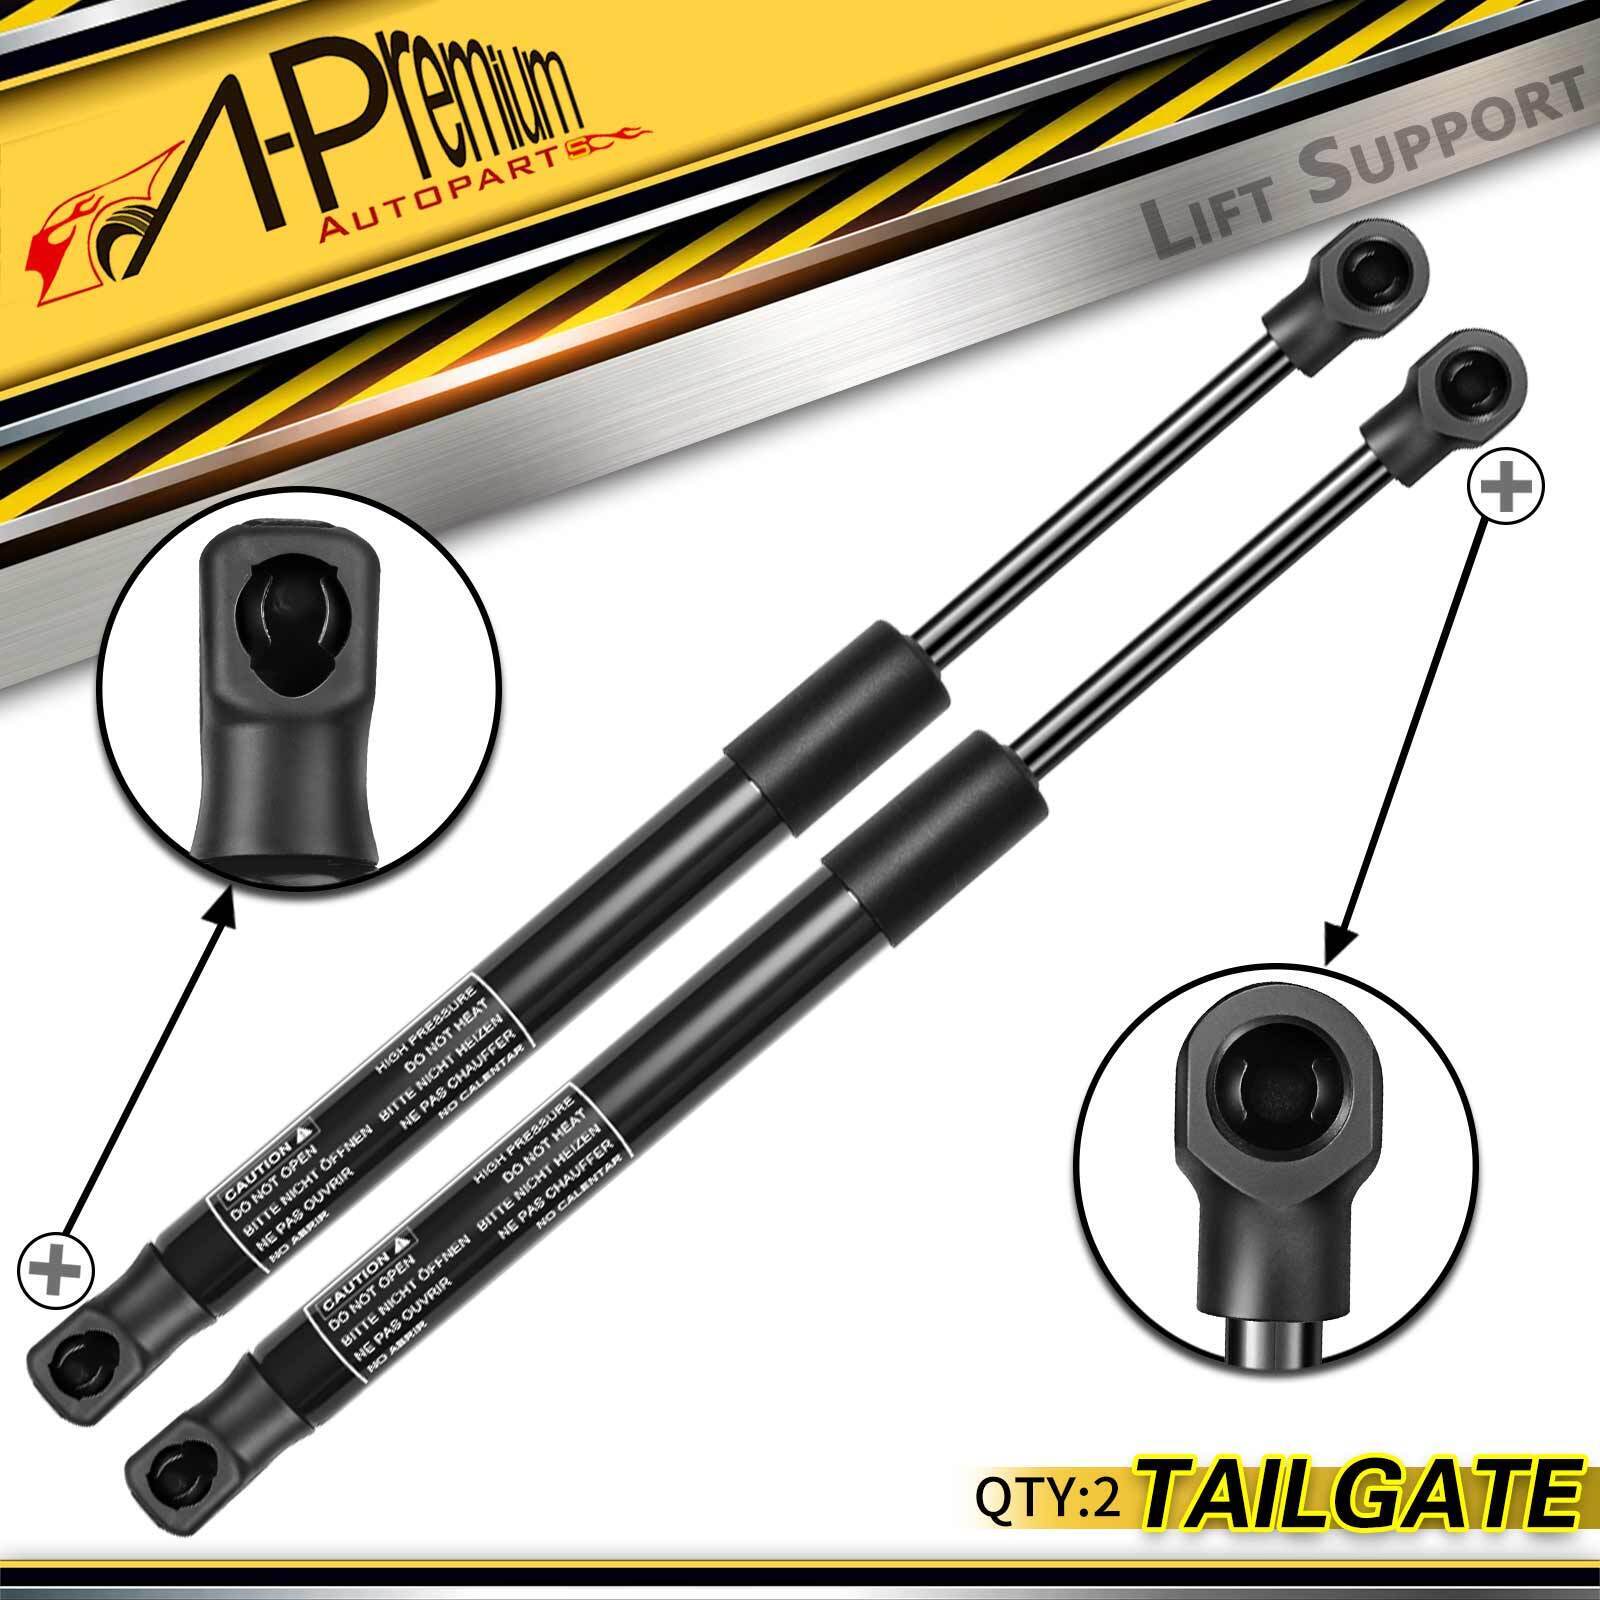 2x Trunk Lift Supports for Aston Martin DBS 2008-2012 DB9 2005-2016 Virage Coupe